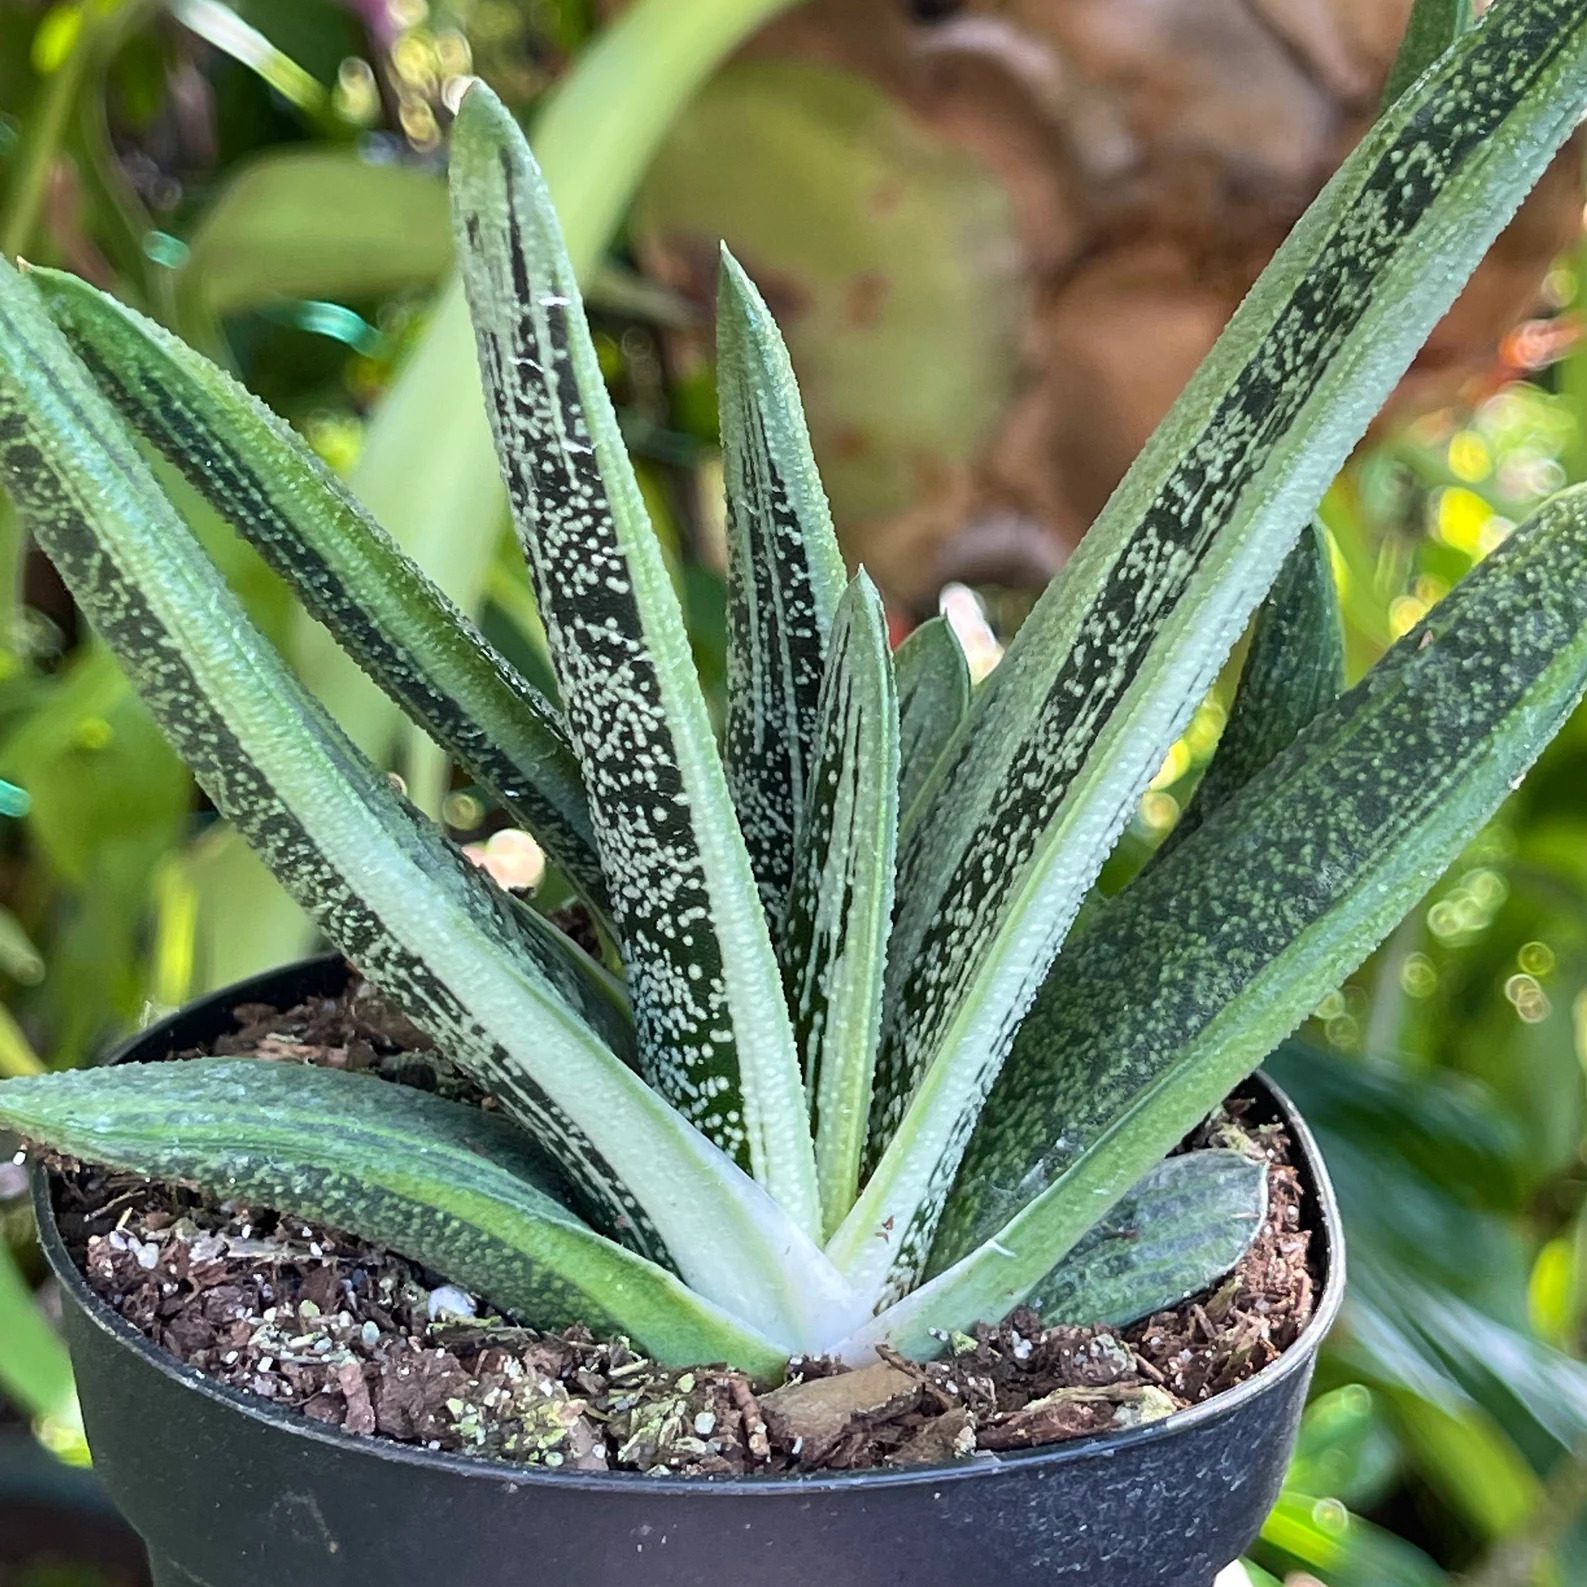 Double Gasteria Spotted Ox Tongue Ecomm Via Etsy.com